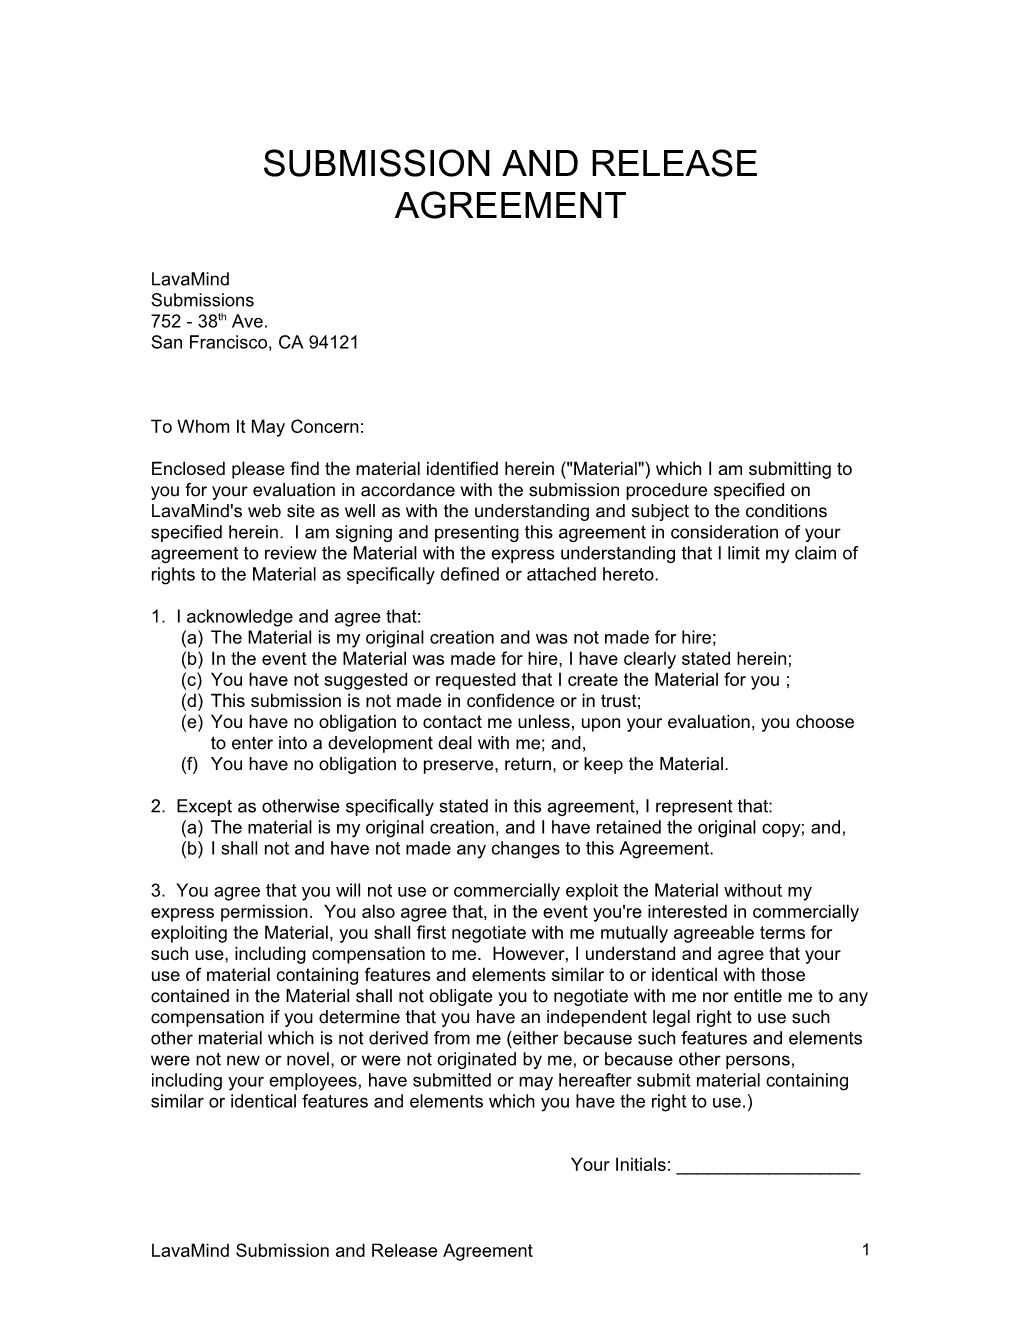 Submission and Release Agreement